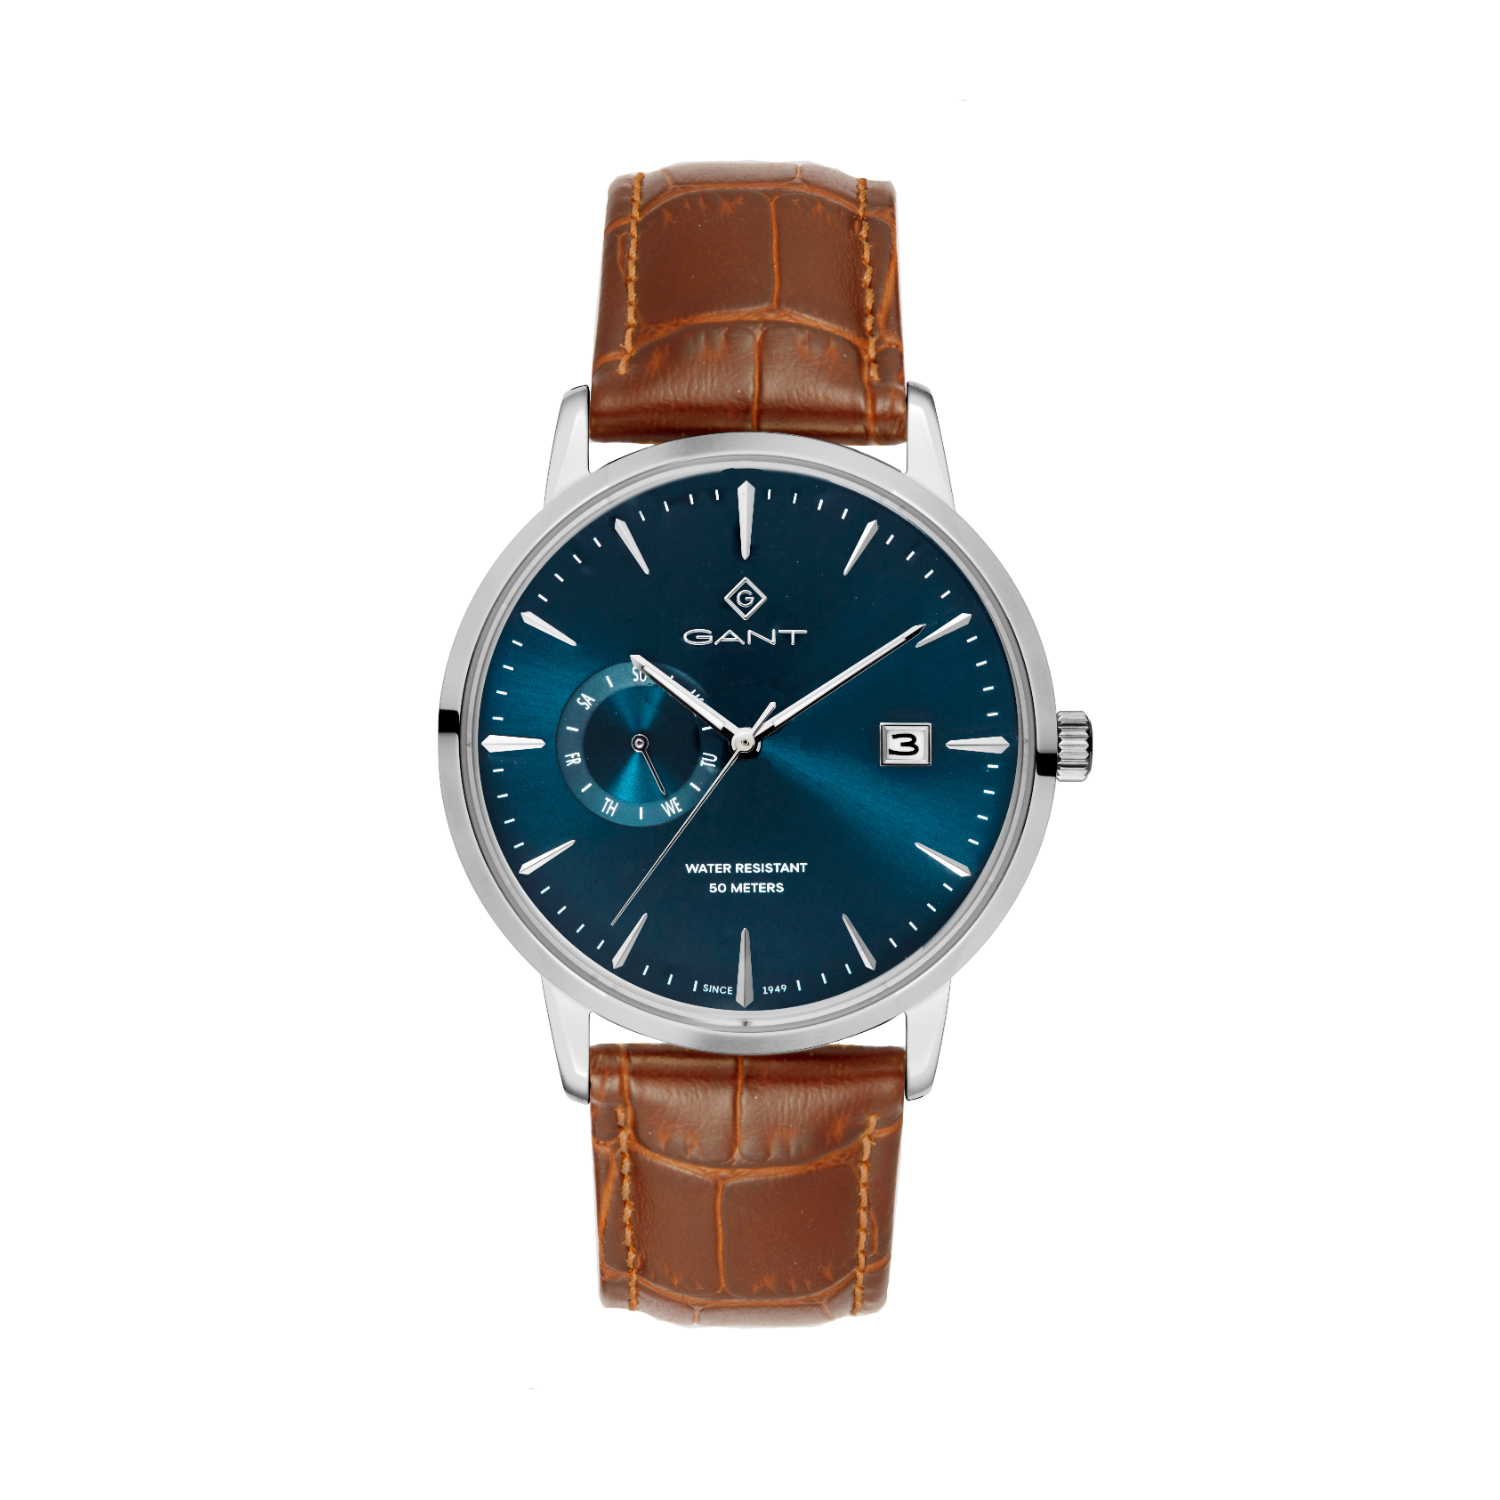 Mens GANT stainless steel watch with blue dial and leather strap.